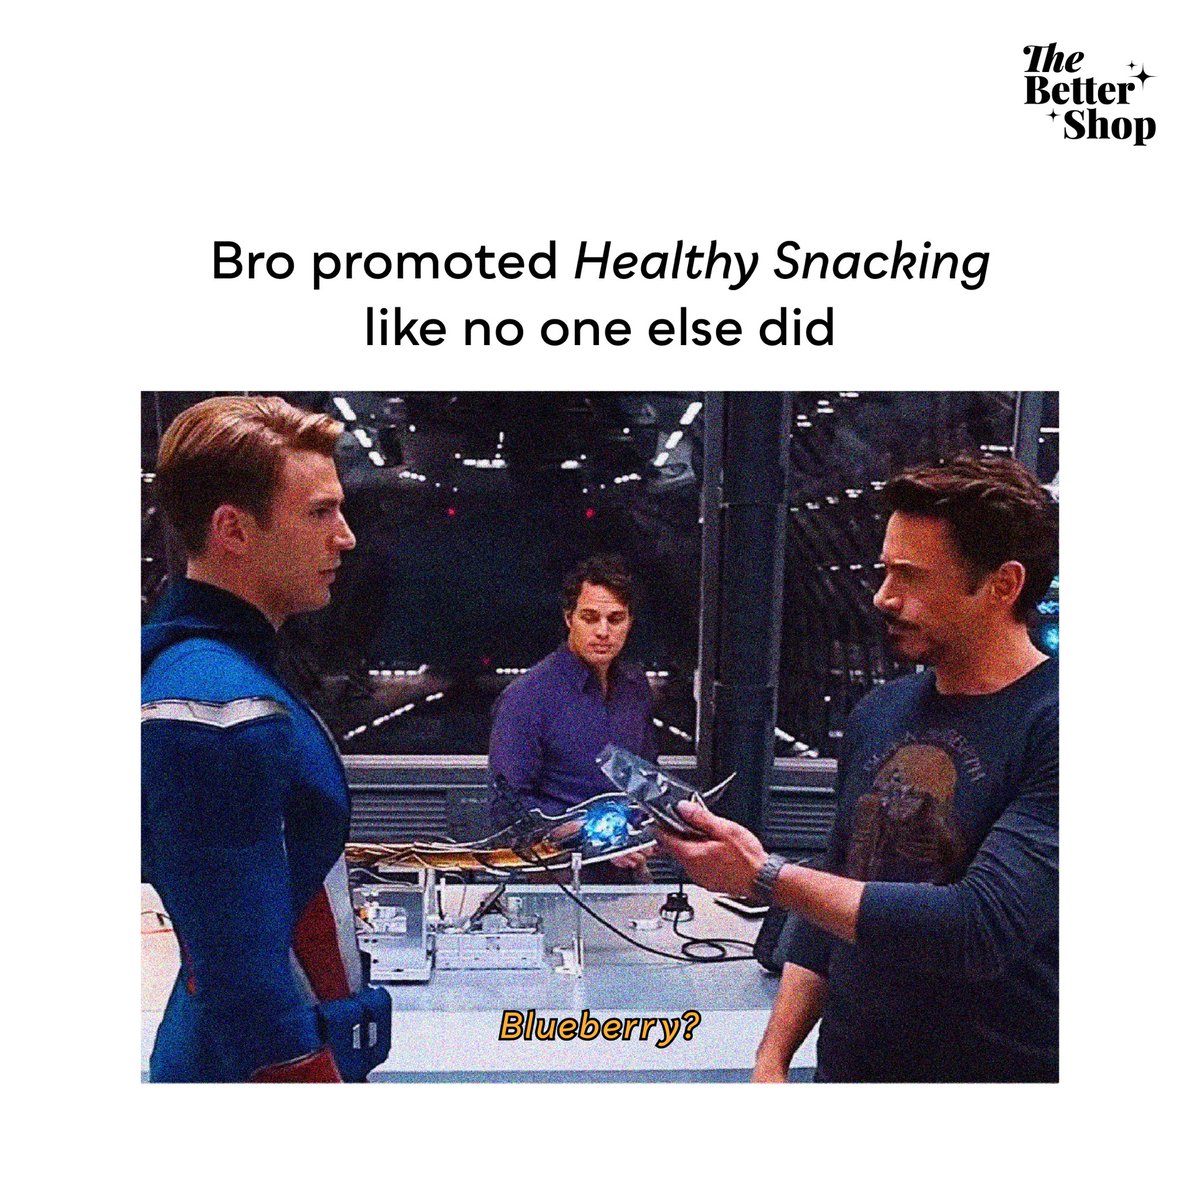 We believe in the power of Marvel-ous Snacking 😋 Image Credits: Avengers (Marvel Studios) #TheBetterShop #healthy #healthyfood #Marvel #TonyStark #snacking #bro